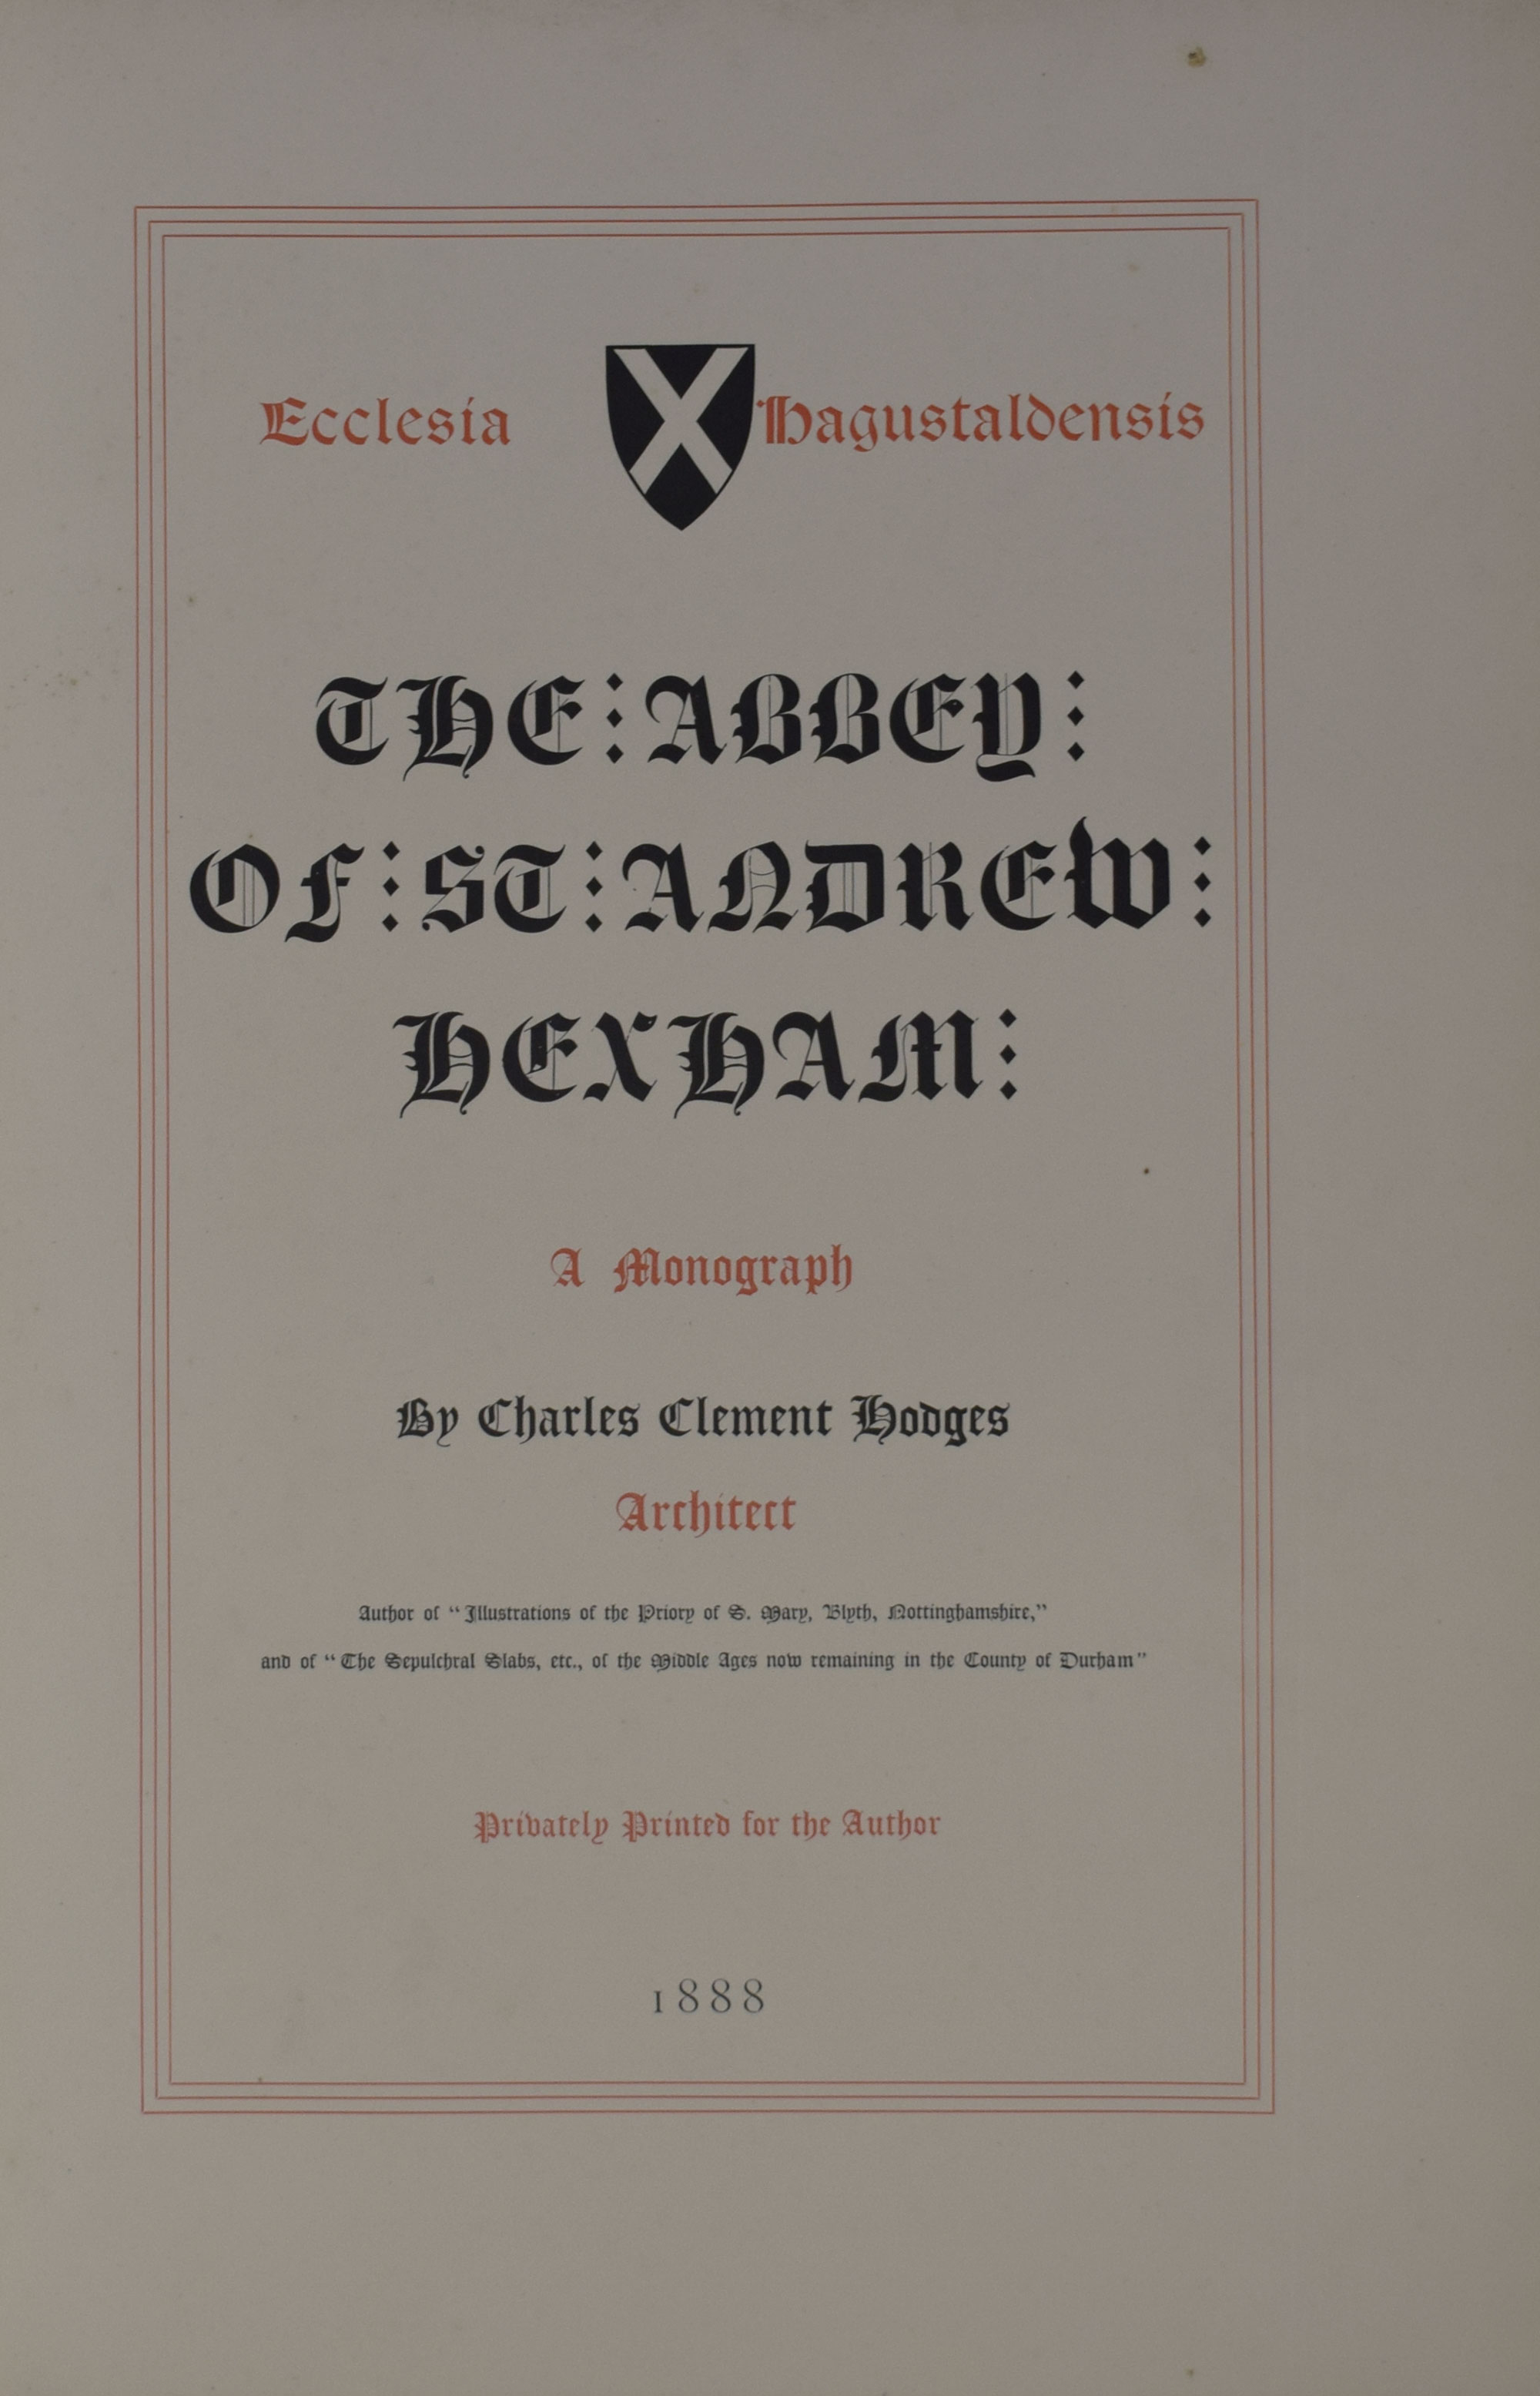 The Abbey of St Andrew Hexham. A Monograph.